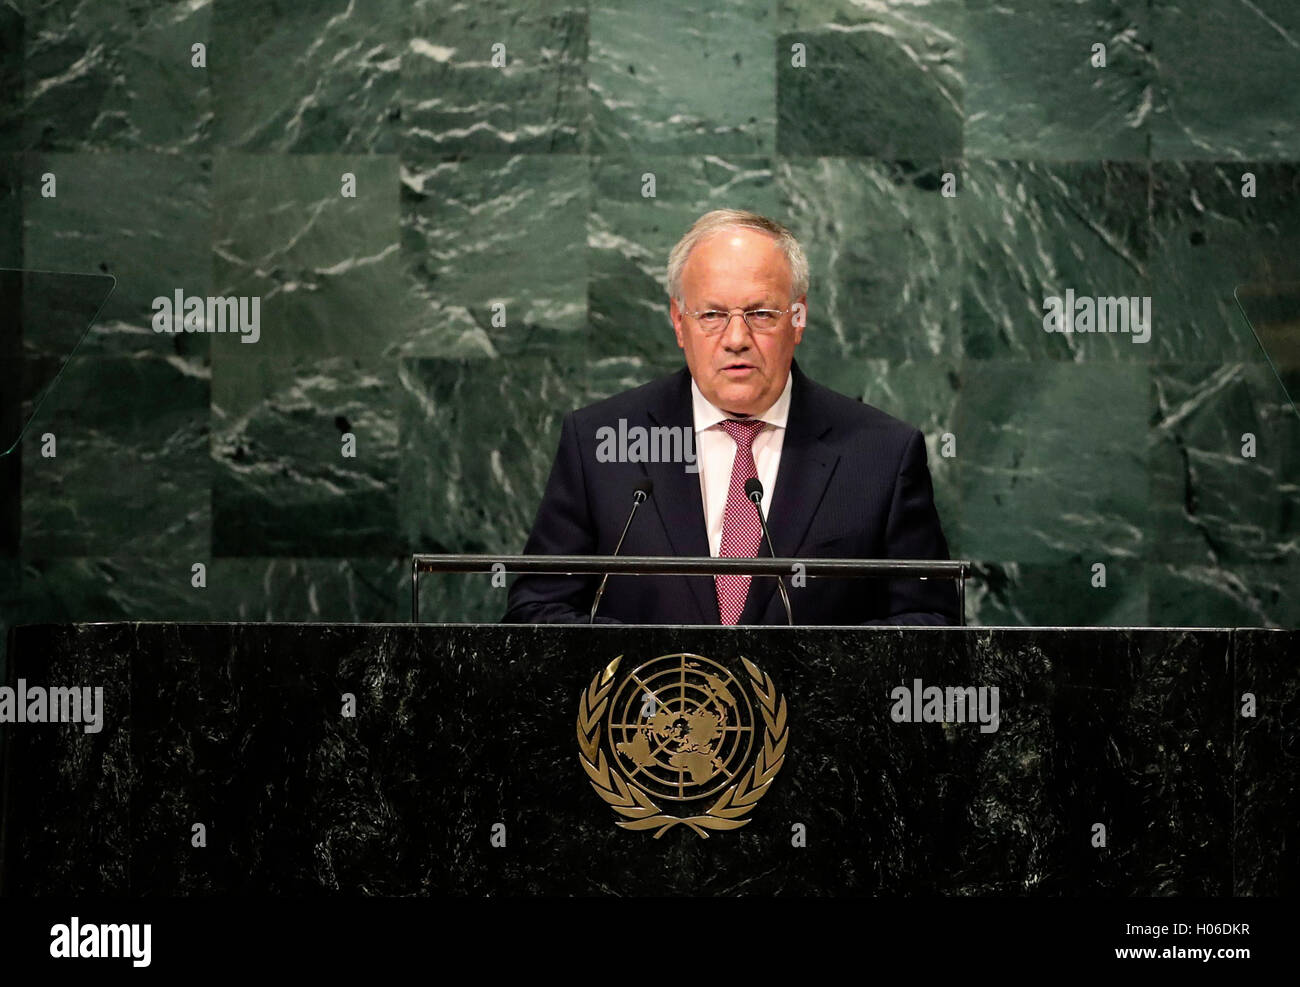 United Nations. 20th Sep, 2016. Swiss President Johann Schneider-Ammann speaks at the 71st session of the United Nations General Assembly at the UN headquarters in New York, on Sept. 20, 2016. The 71st session of the UN General Assembly on Tuesday opened its annual high-level General Debate at the UN headquarters in New York, with a focus on pushing for the world's sustainable development. Credit:  Wang Ying/Xinhua/Alamy Live News Stock Photo